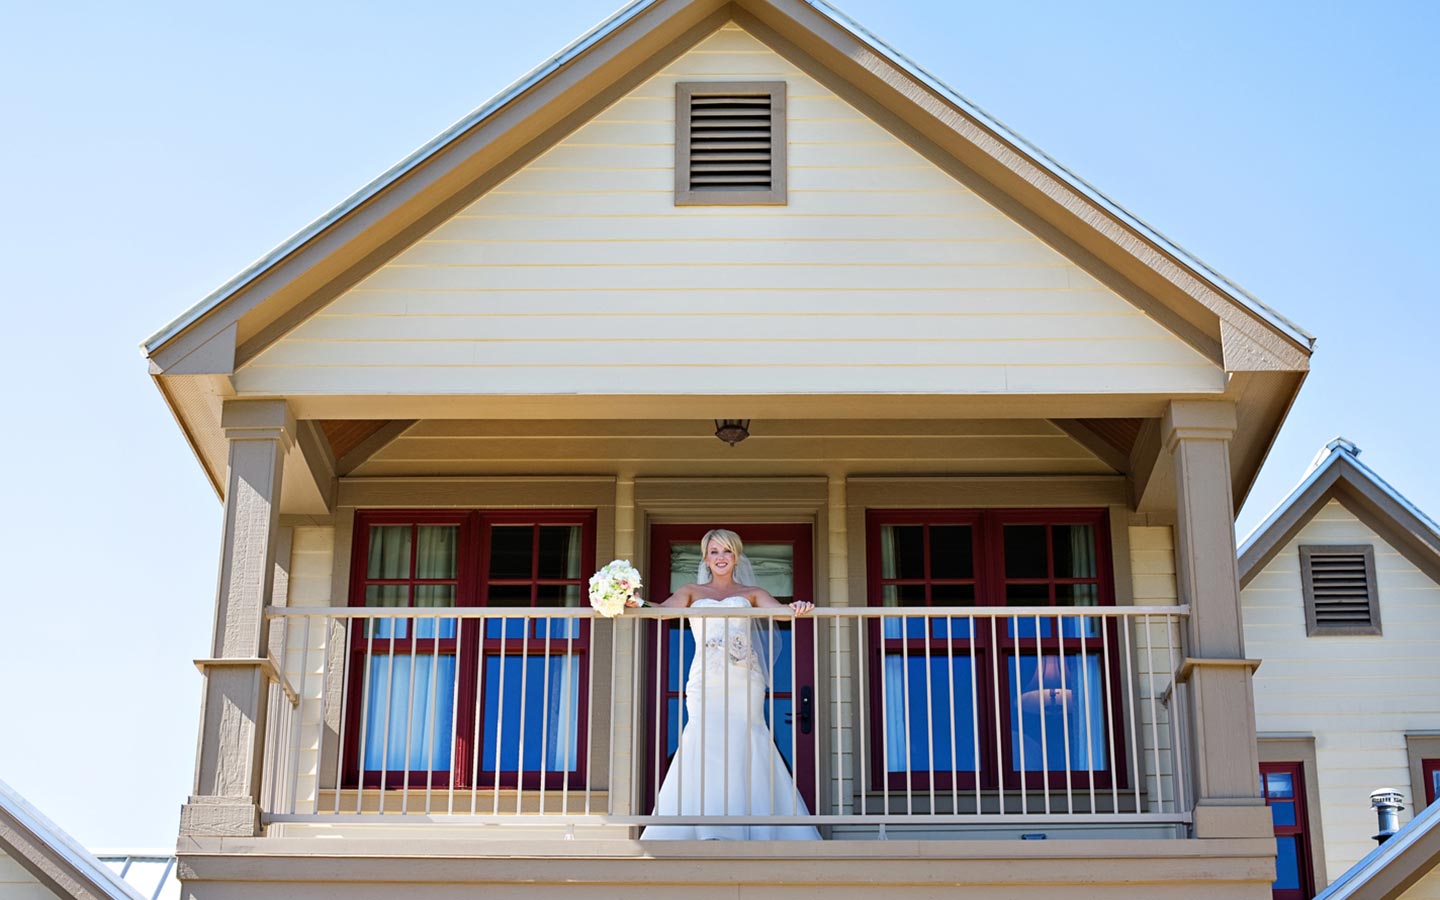 Texas waterfront wedding venues - the bride overlooks a railing at the inn